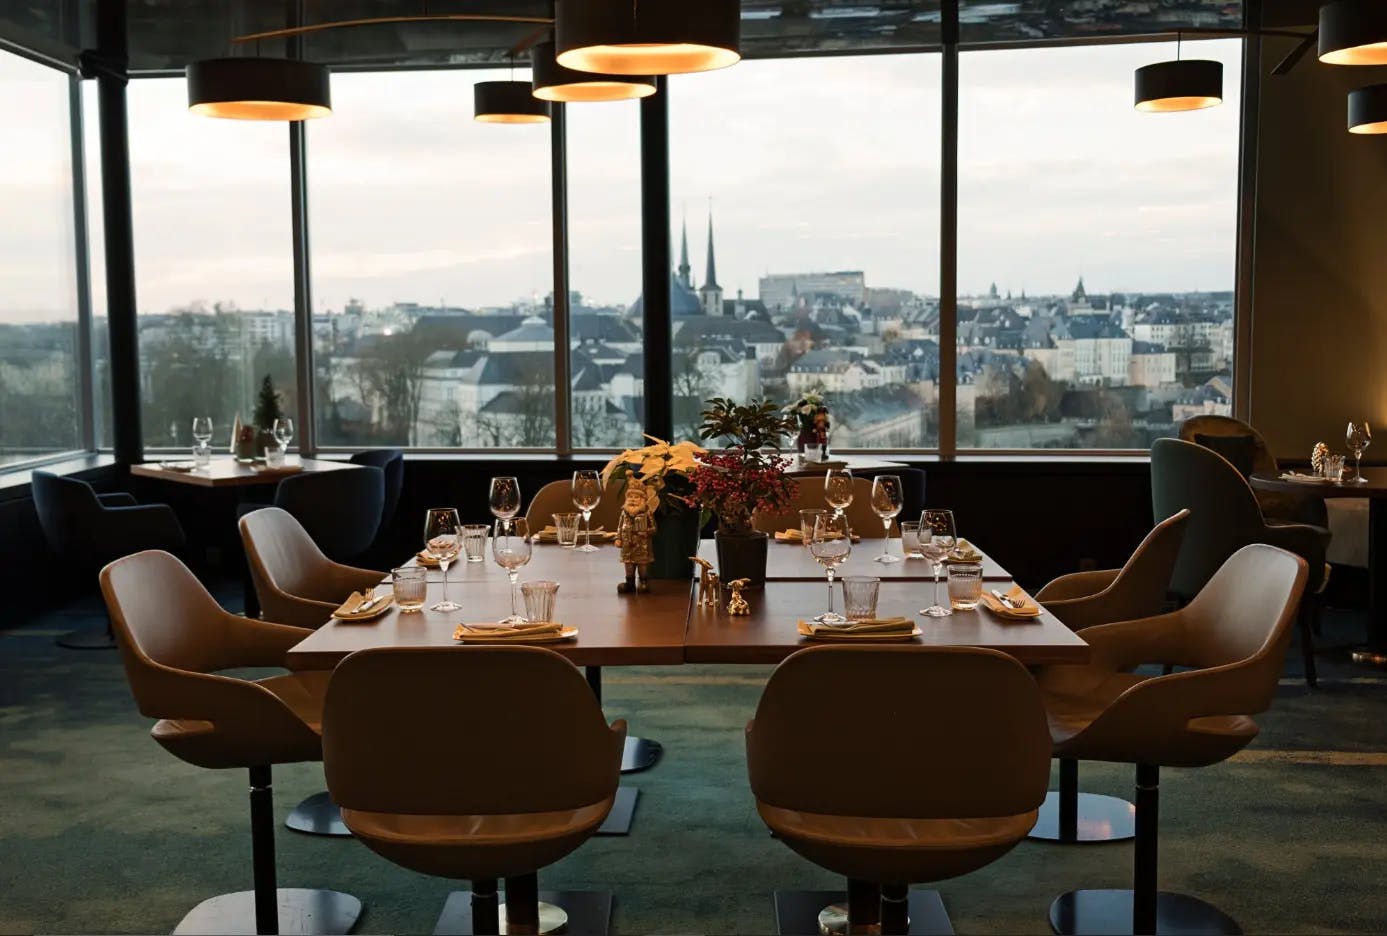 Restaurant with a view on Luxembourg